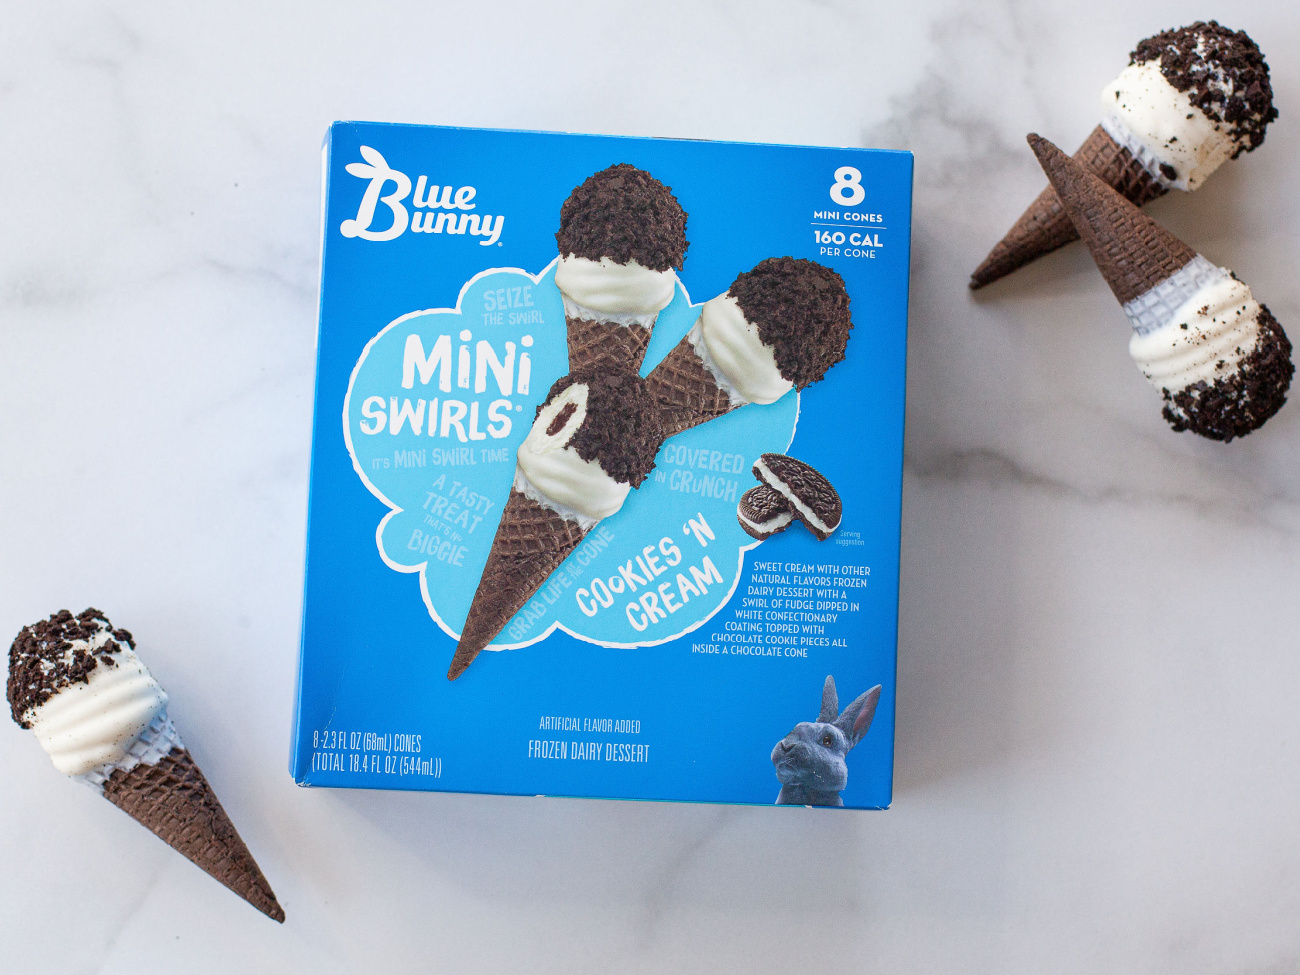 Get Frozen Sweet Treats For Cheap – Blue Bunny Soft Scoopable As Low As $2.49 At Kroger (Plus Cheap Mini Bars or Cones)